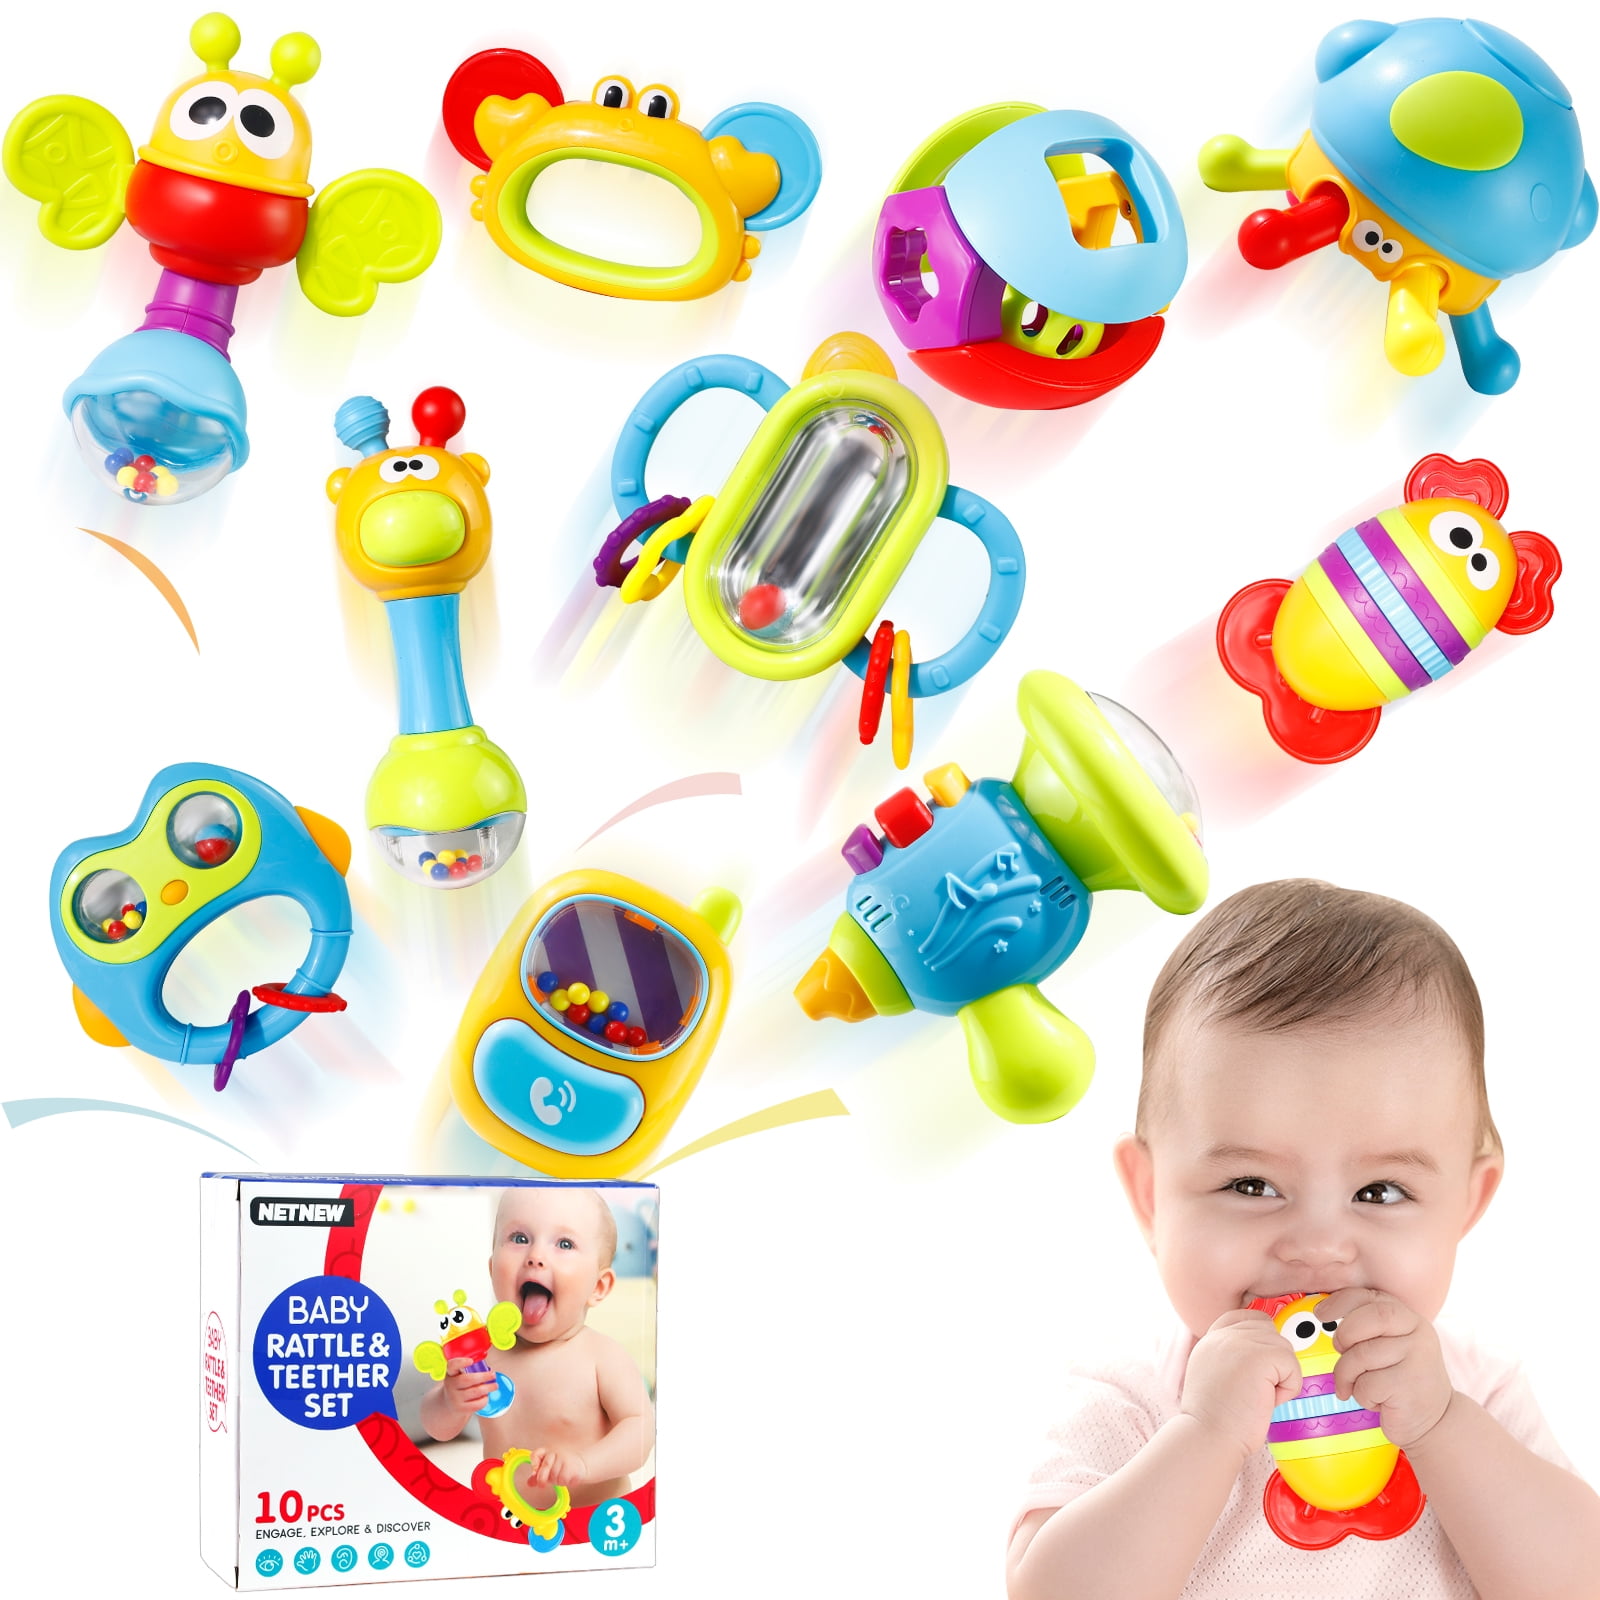 LITTLESMET Baby Rattle Sets Teether Rattles Toys, 8pcs Babies Grab Shaker  and Spin Rattle Toy Early Educational Toys with Owl Bottle Gifts Set for